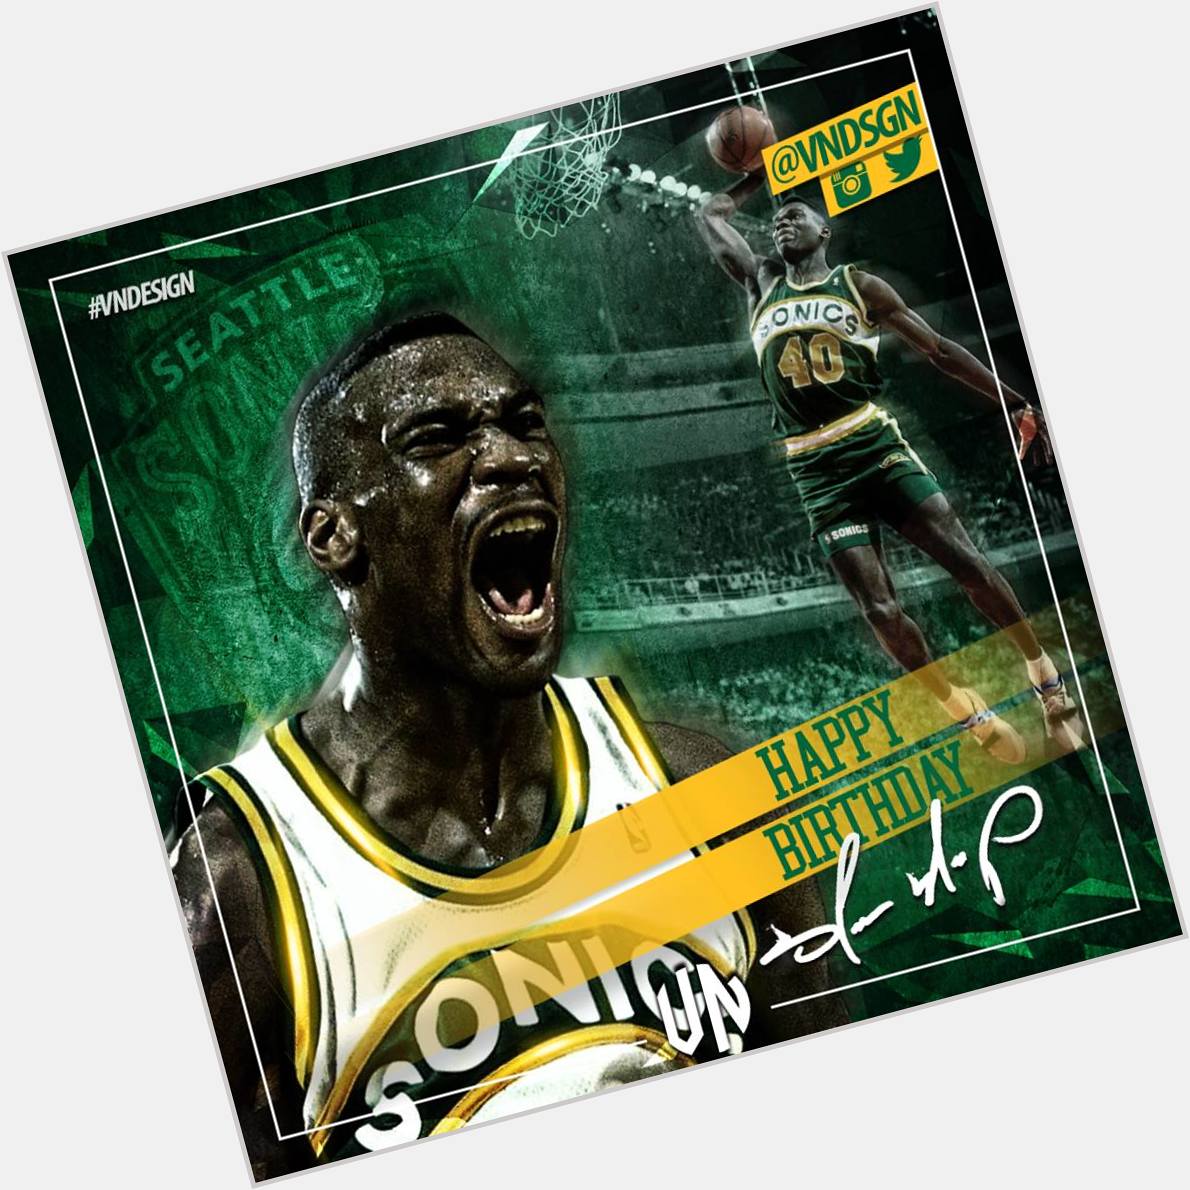 Join me in wishing a happy birthday to Shawn Kemp ! 